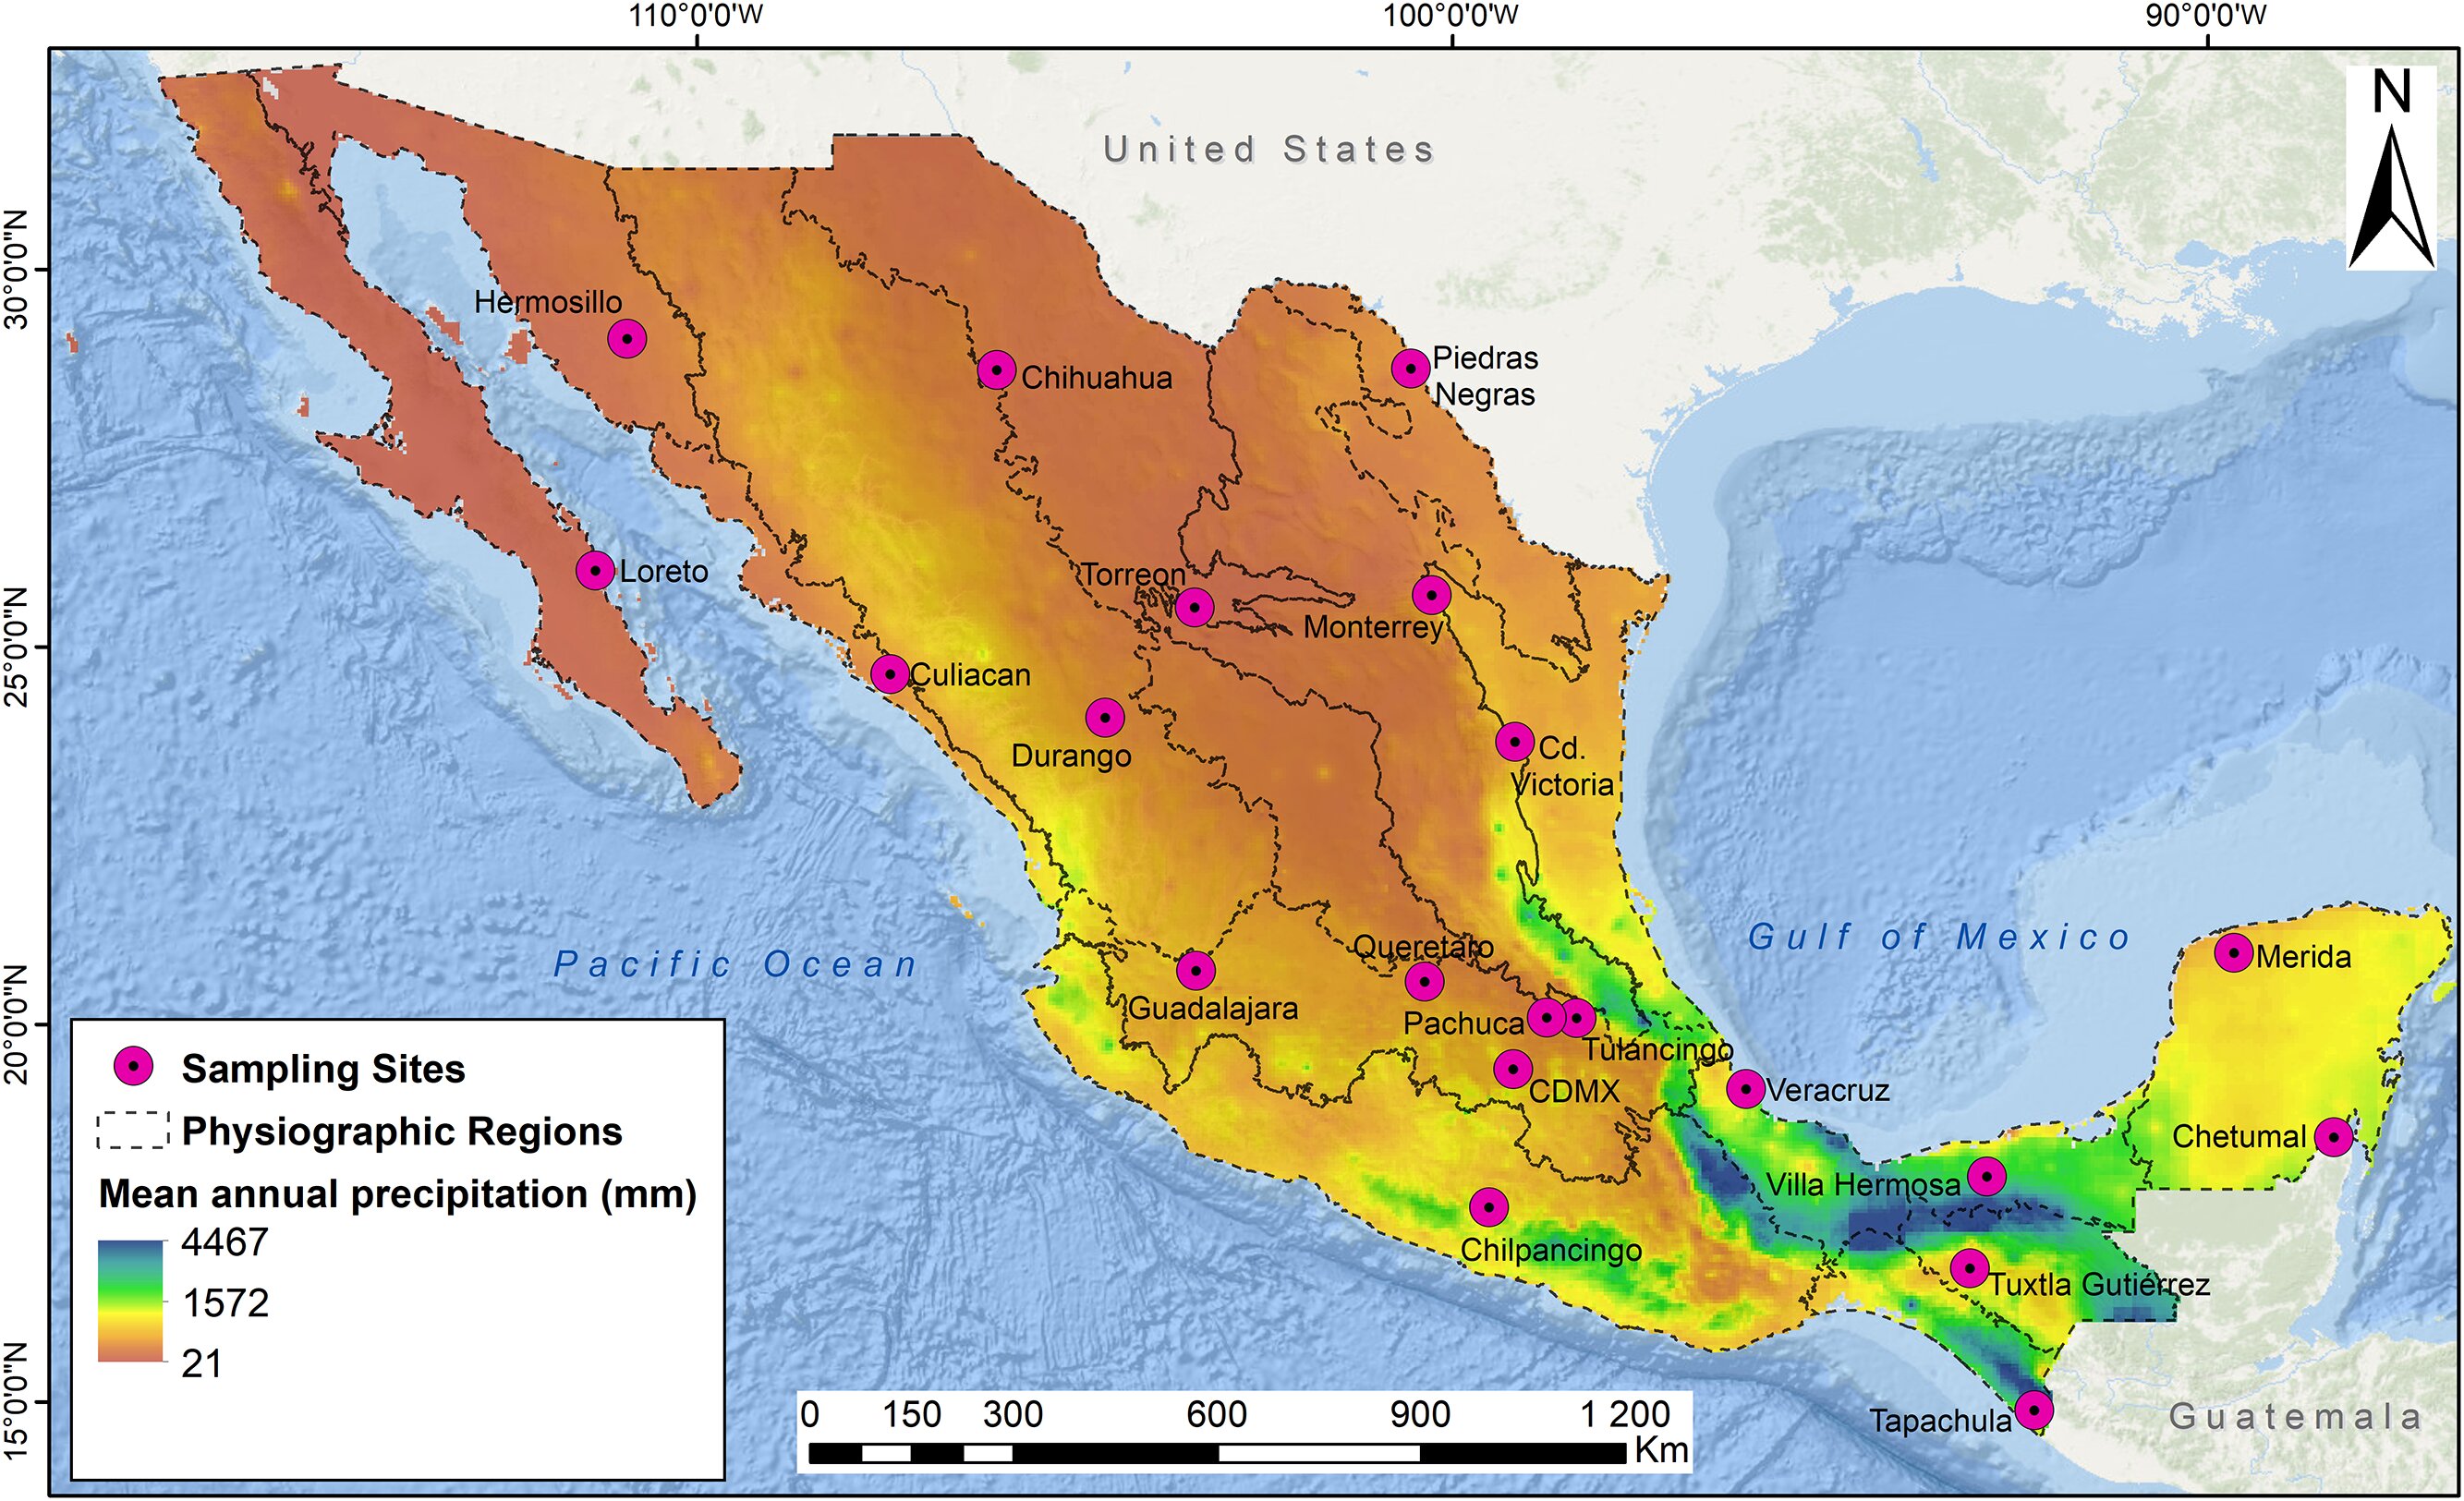 Isotope database will help Mexican communities better understand hydrology processes